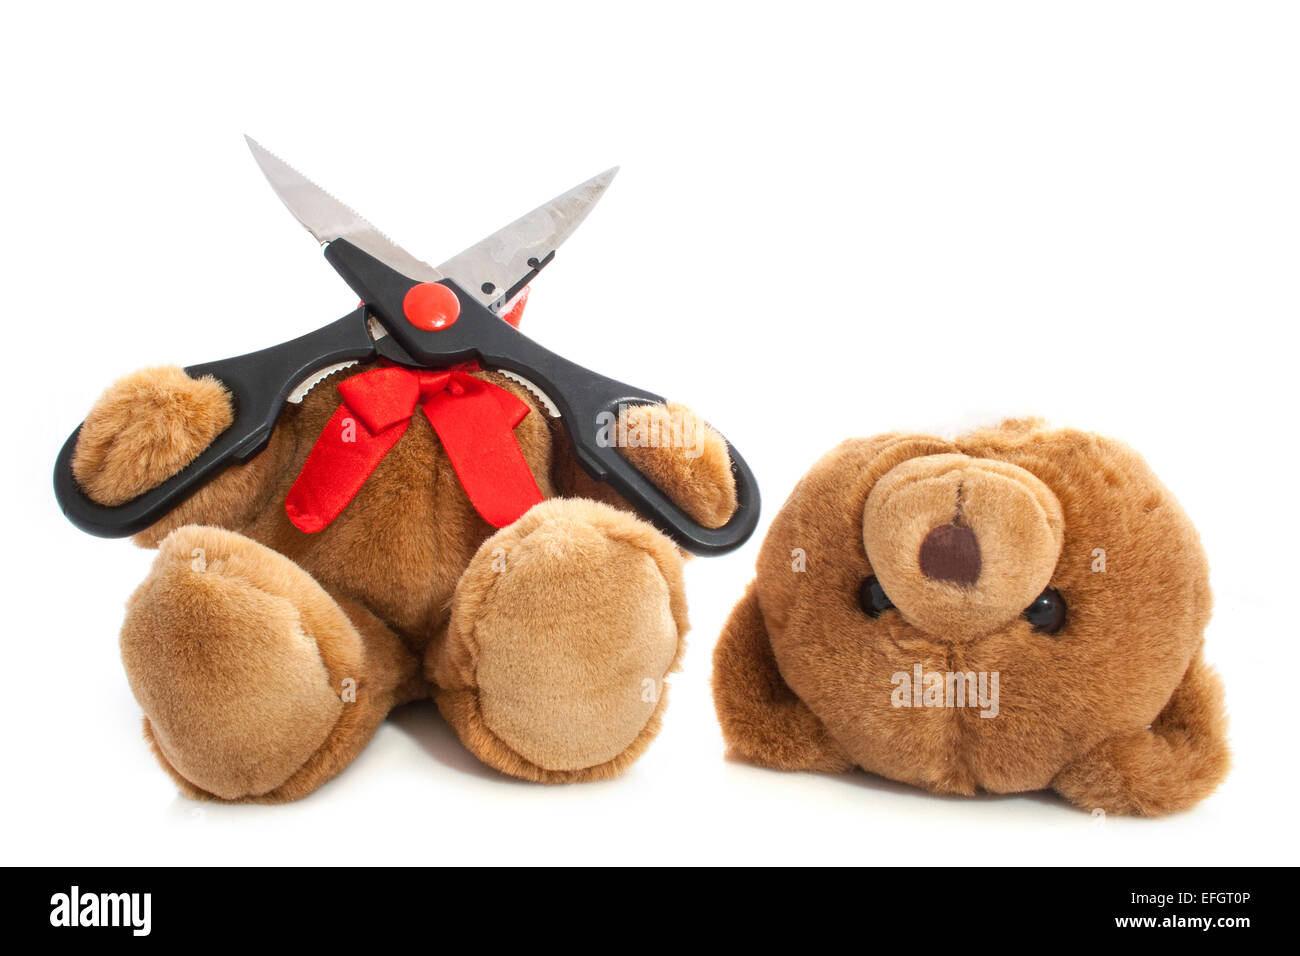 Bear whit his head cut off isolated over white Stock Photo